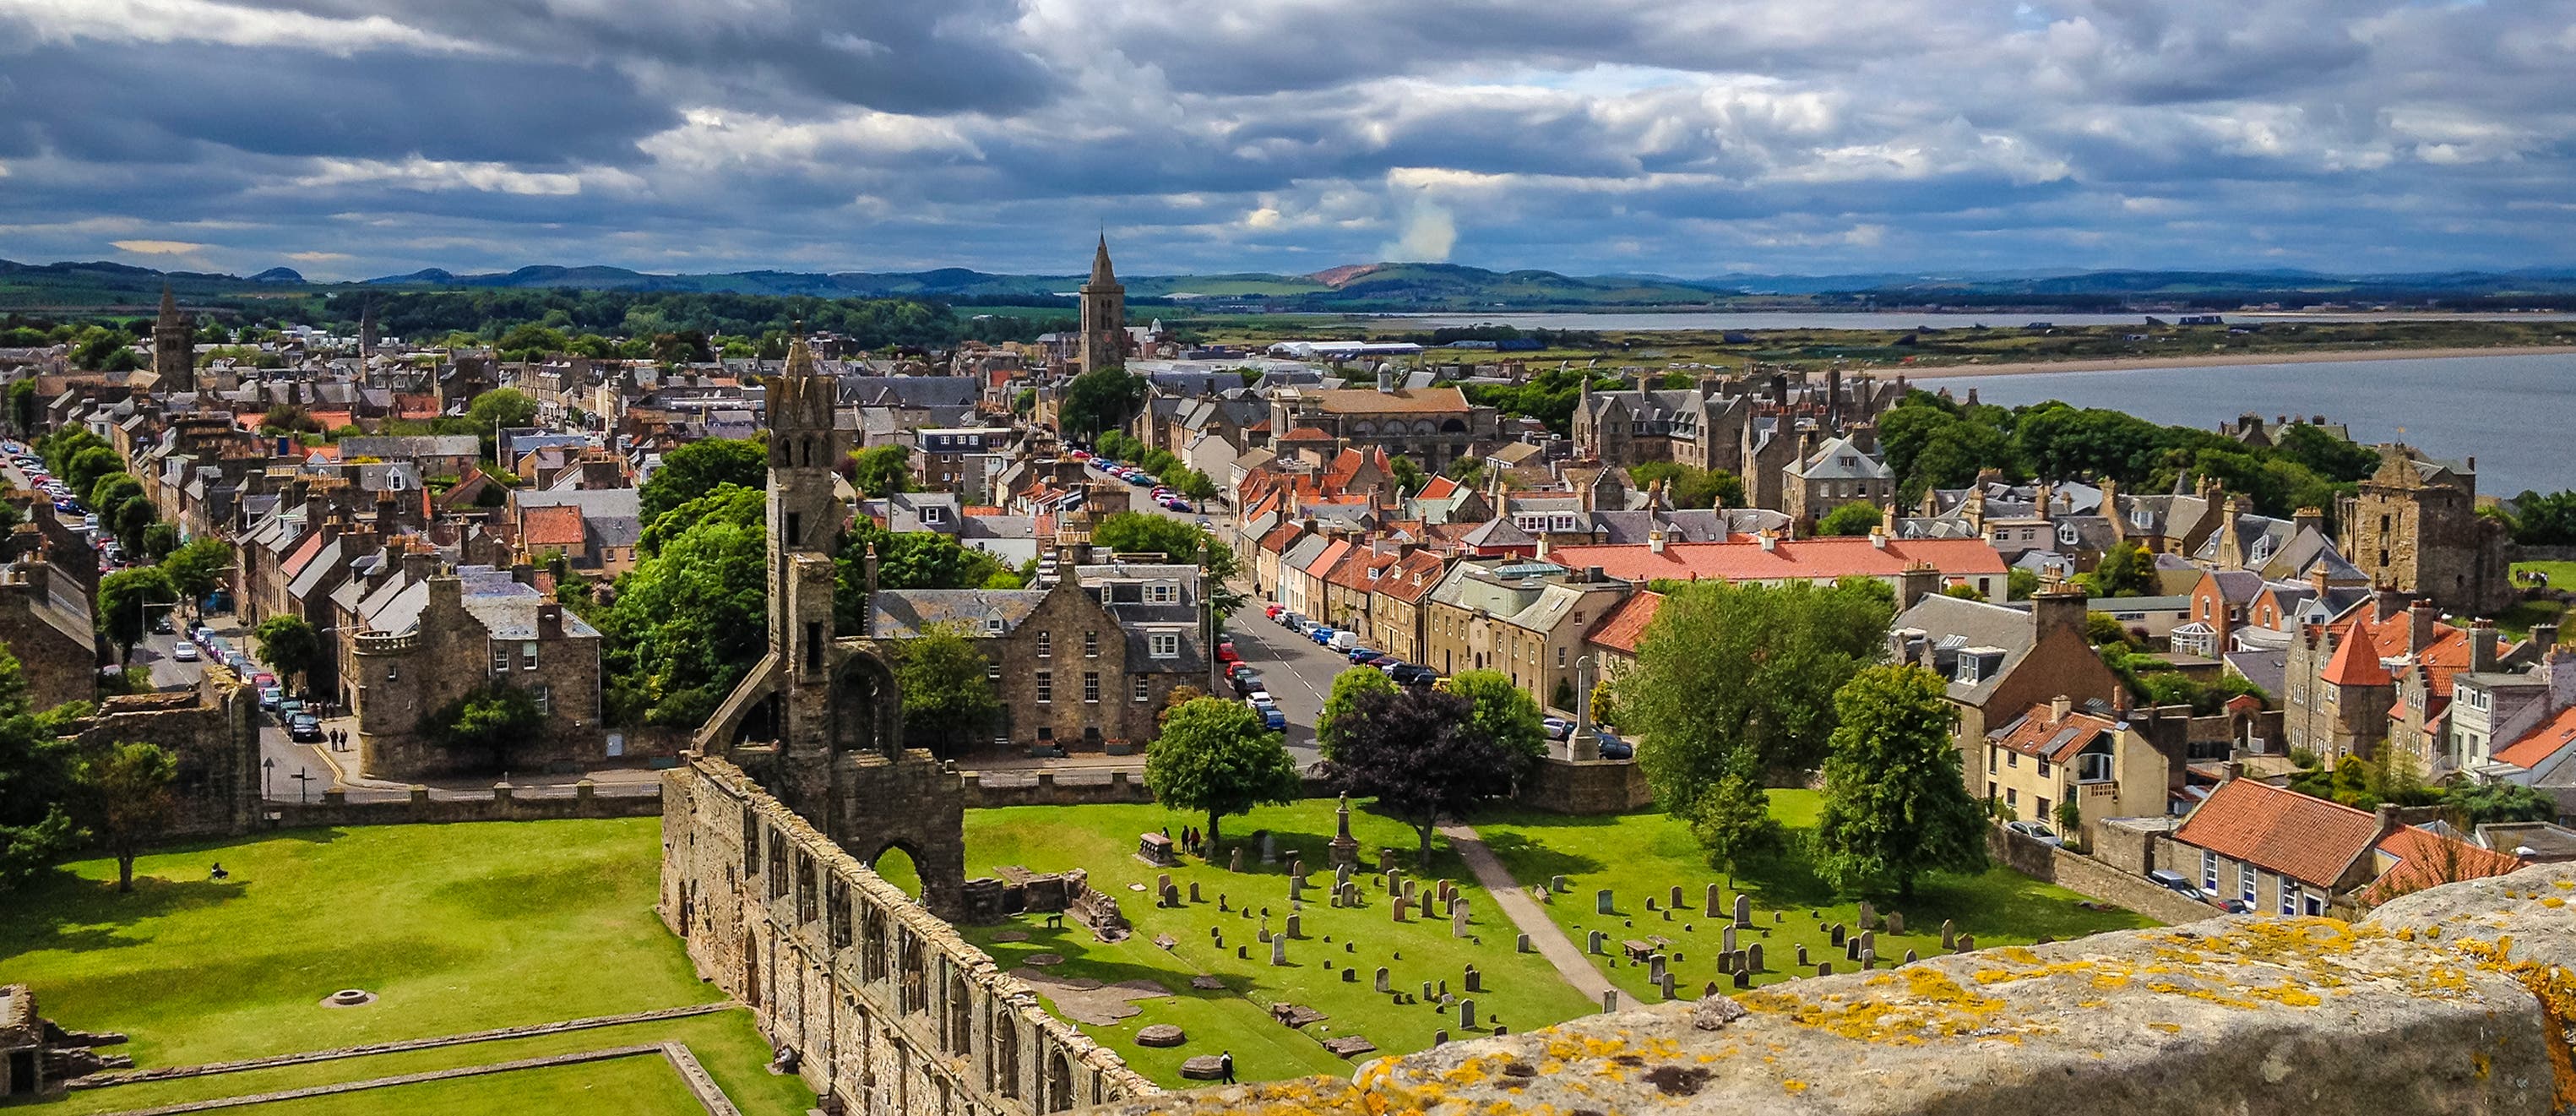 What to see in Écosse St. Andrews